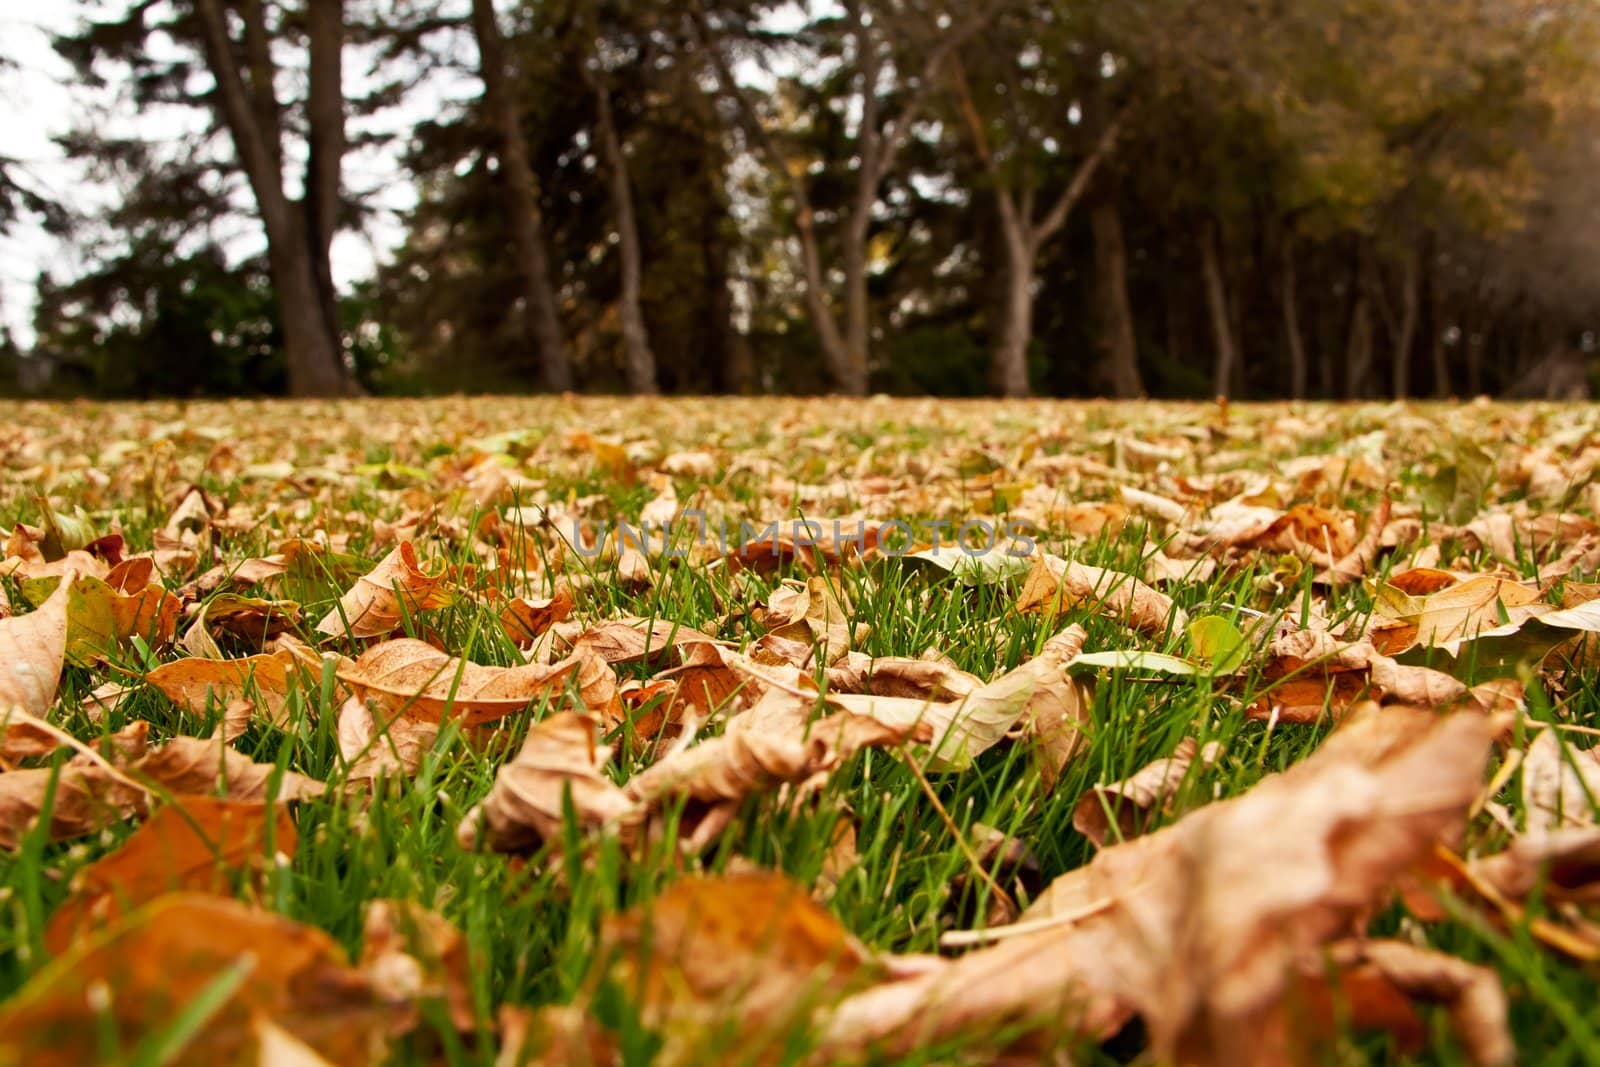 Autumn Leaves On The Ground by RachelD32